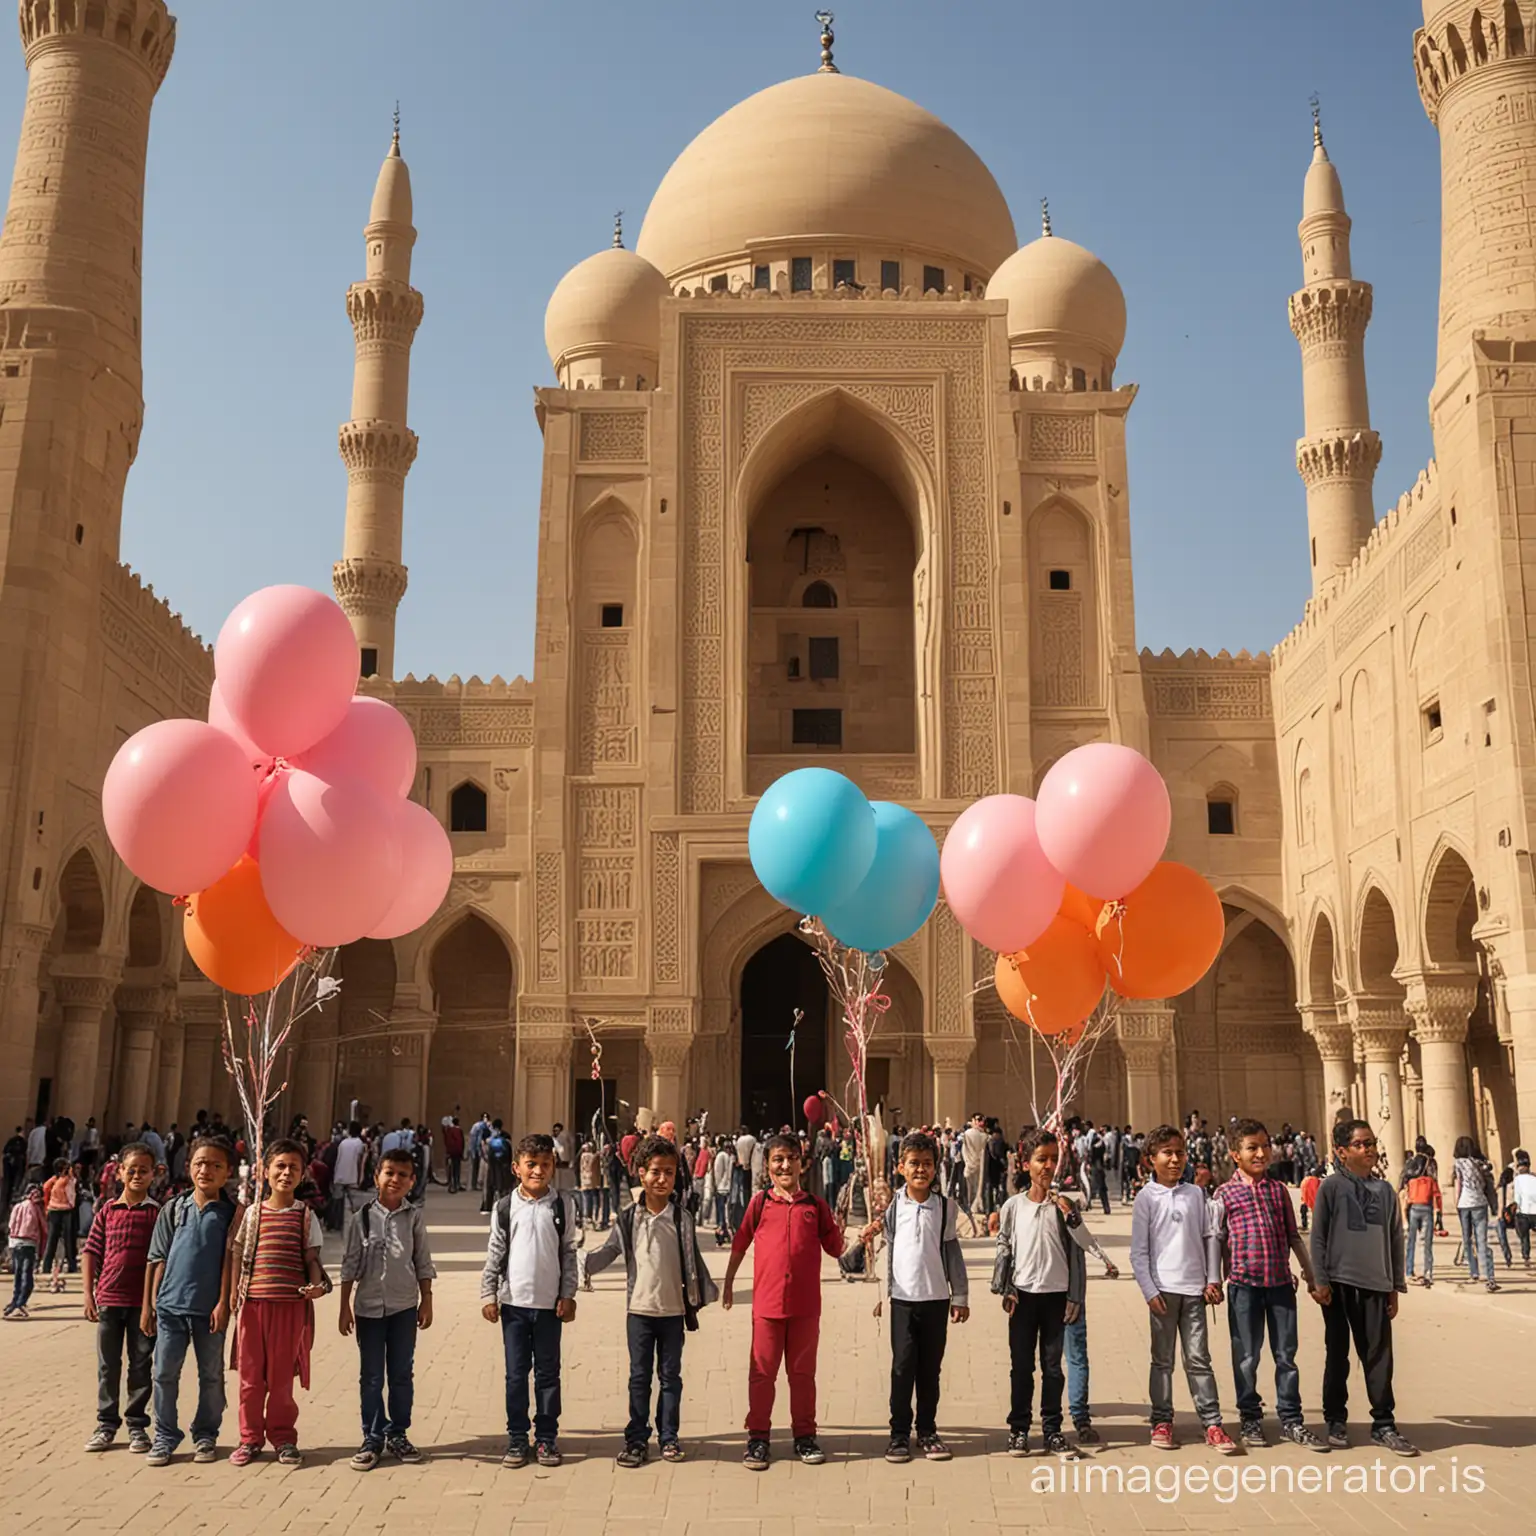 Egyptian-Children-Holding-Colorful-Balloons-in-Front-of-a-Majestic-Mosque